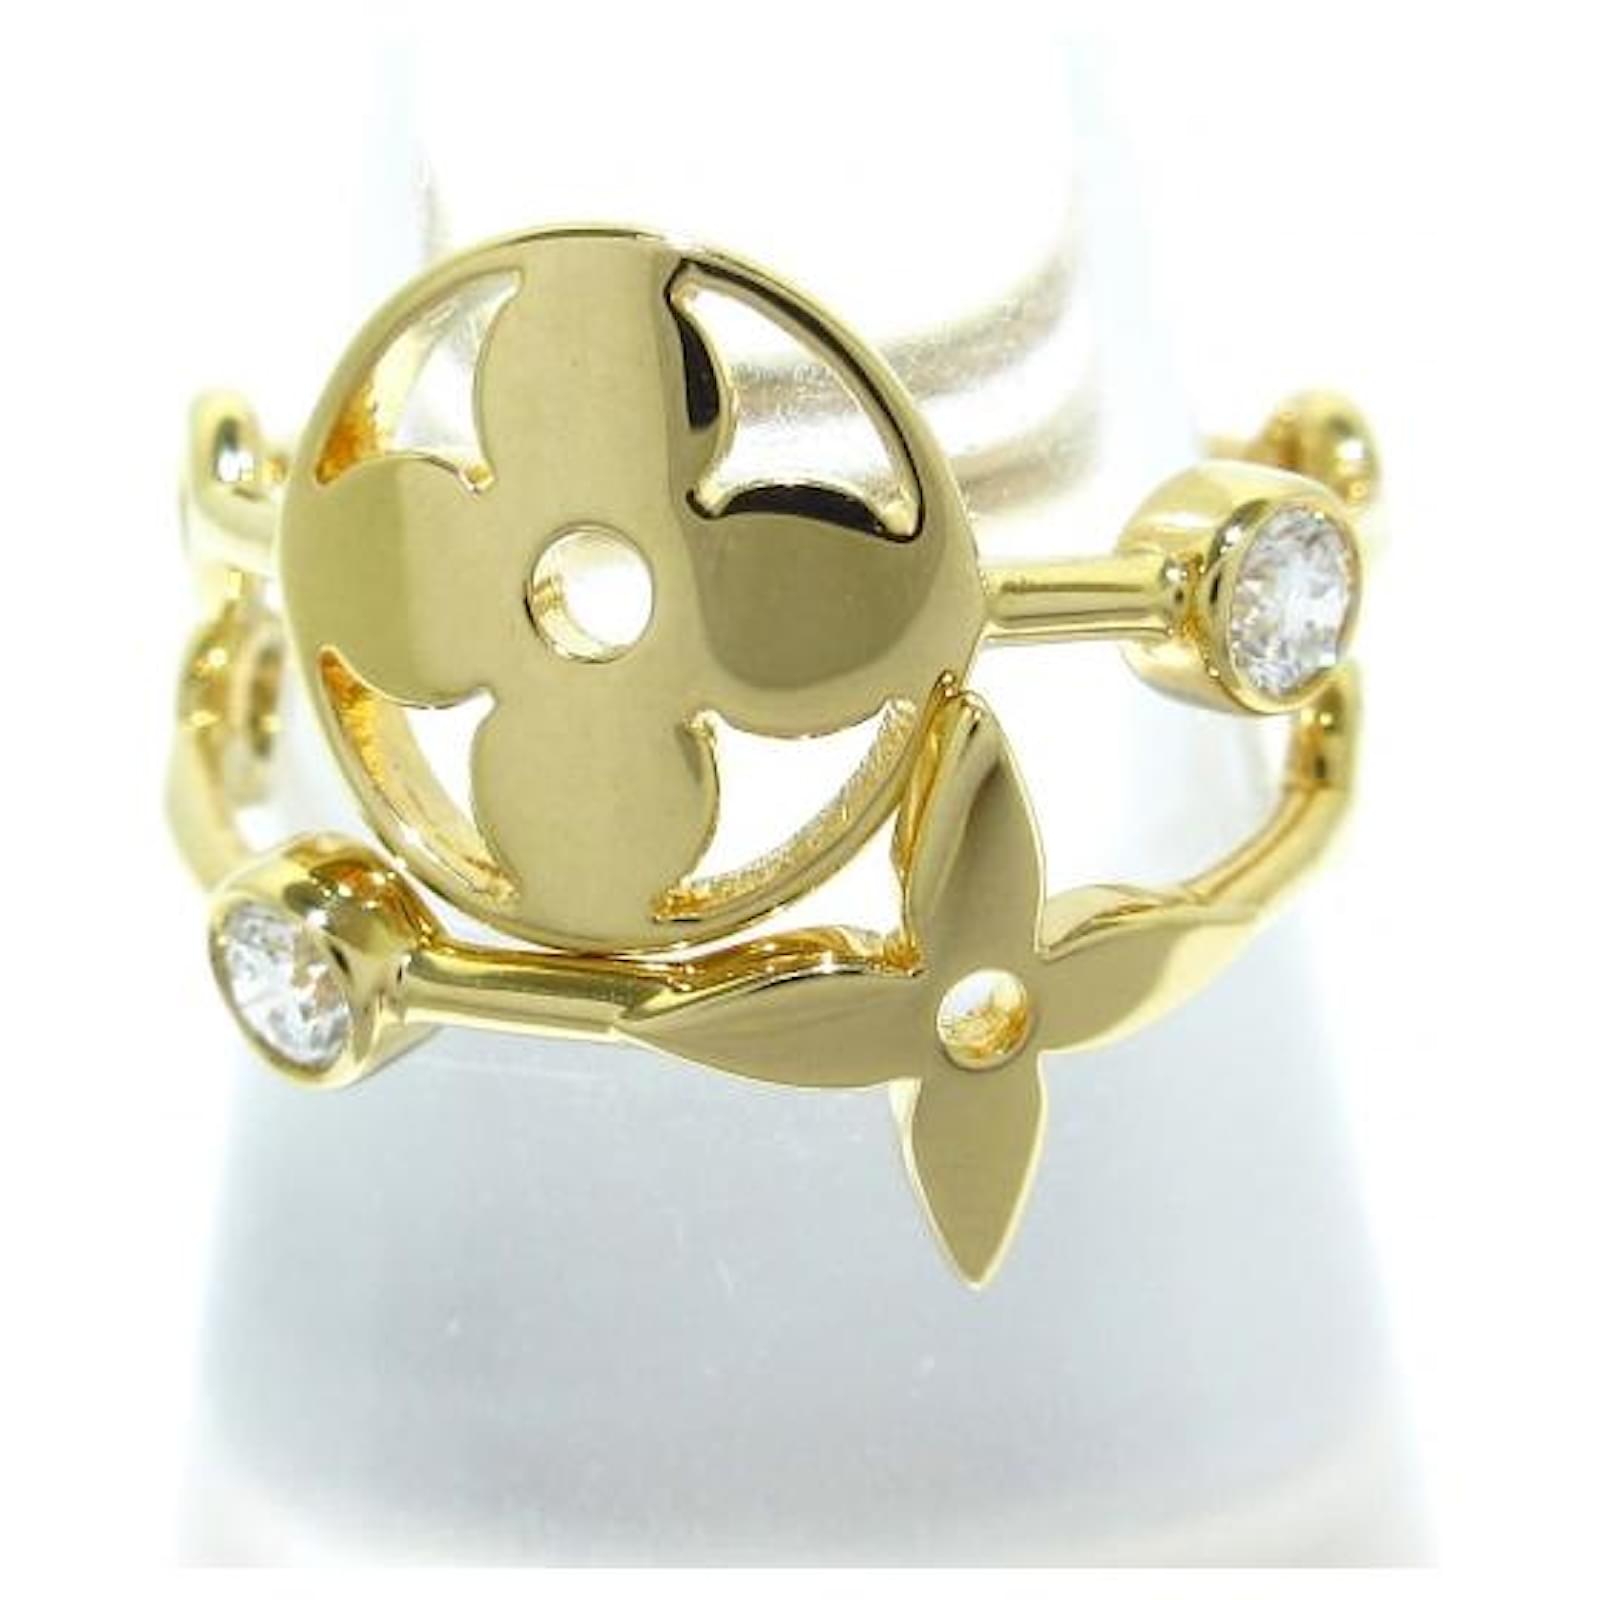 Louis Vuitton, Jewelry, Louis Vuitton Idylle Blossom Ring 3 Golds And  Diamond